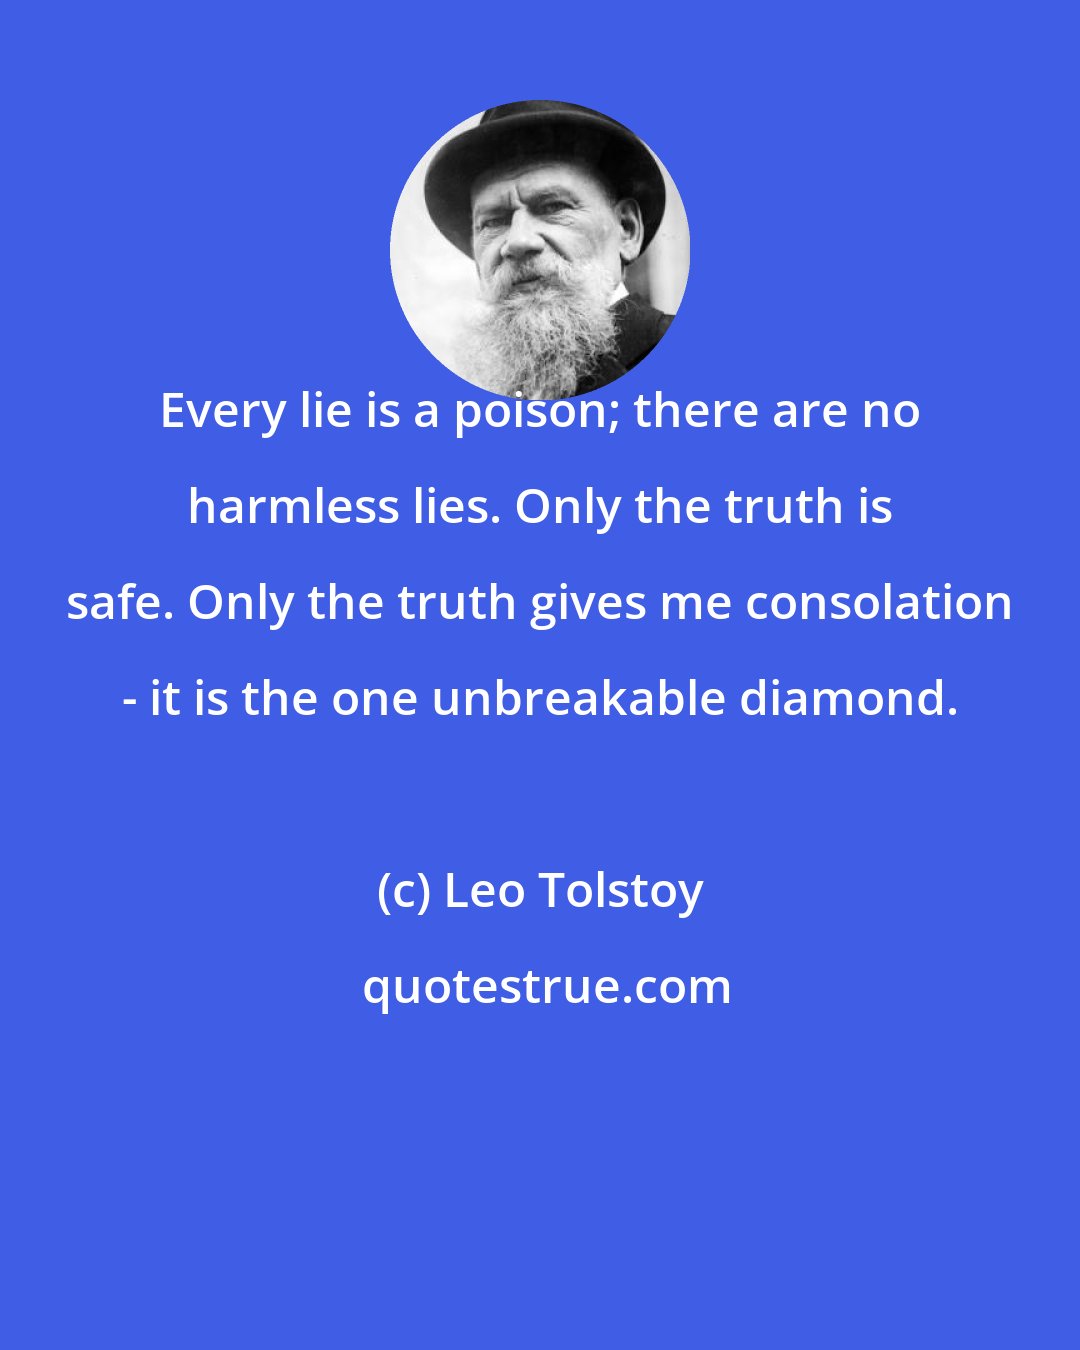 Leo Tolstoy: Every lie is a poison; there are no harmless lies. Only the truth is safe. Only the truth gives me consolation - it is the one unbreakable diamond.